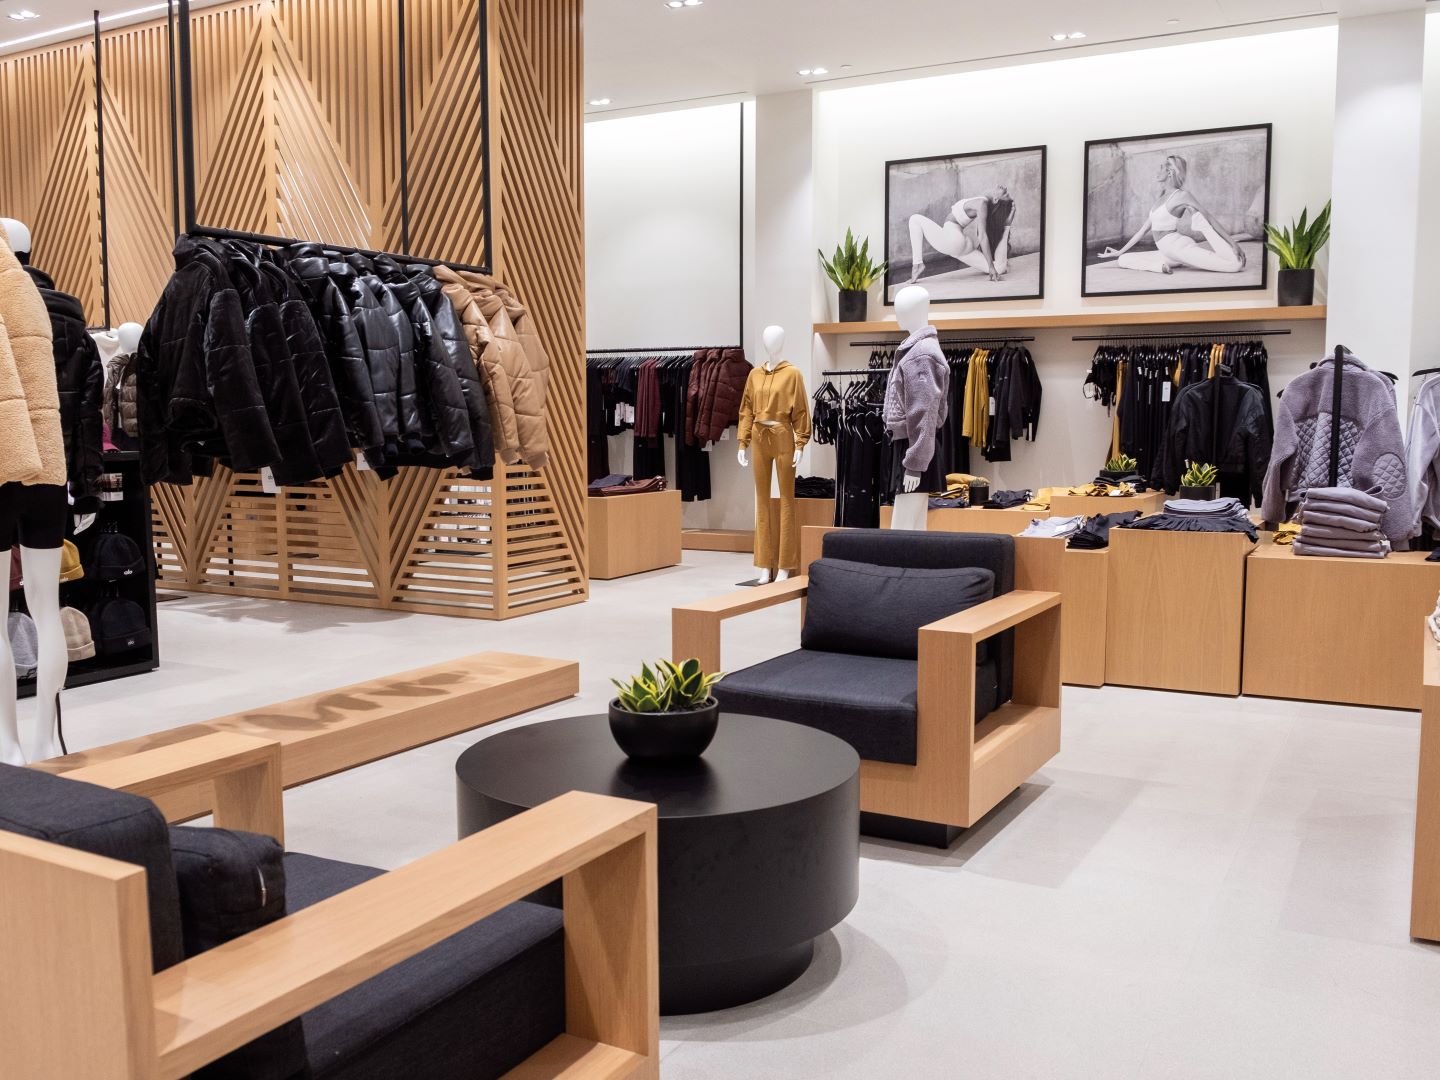 US luxury activewear brand Alo Yoga opens first flagship store in